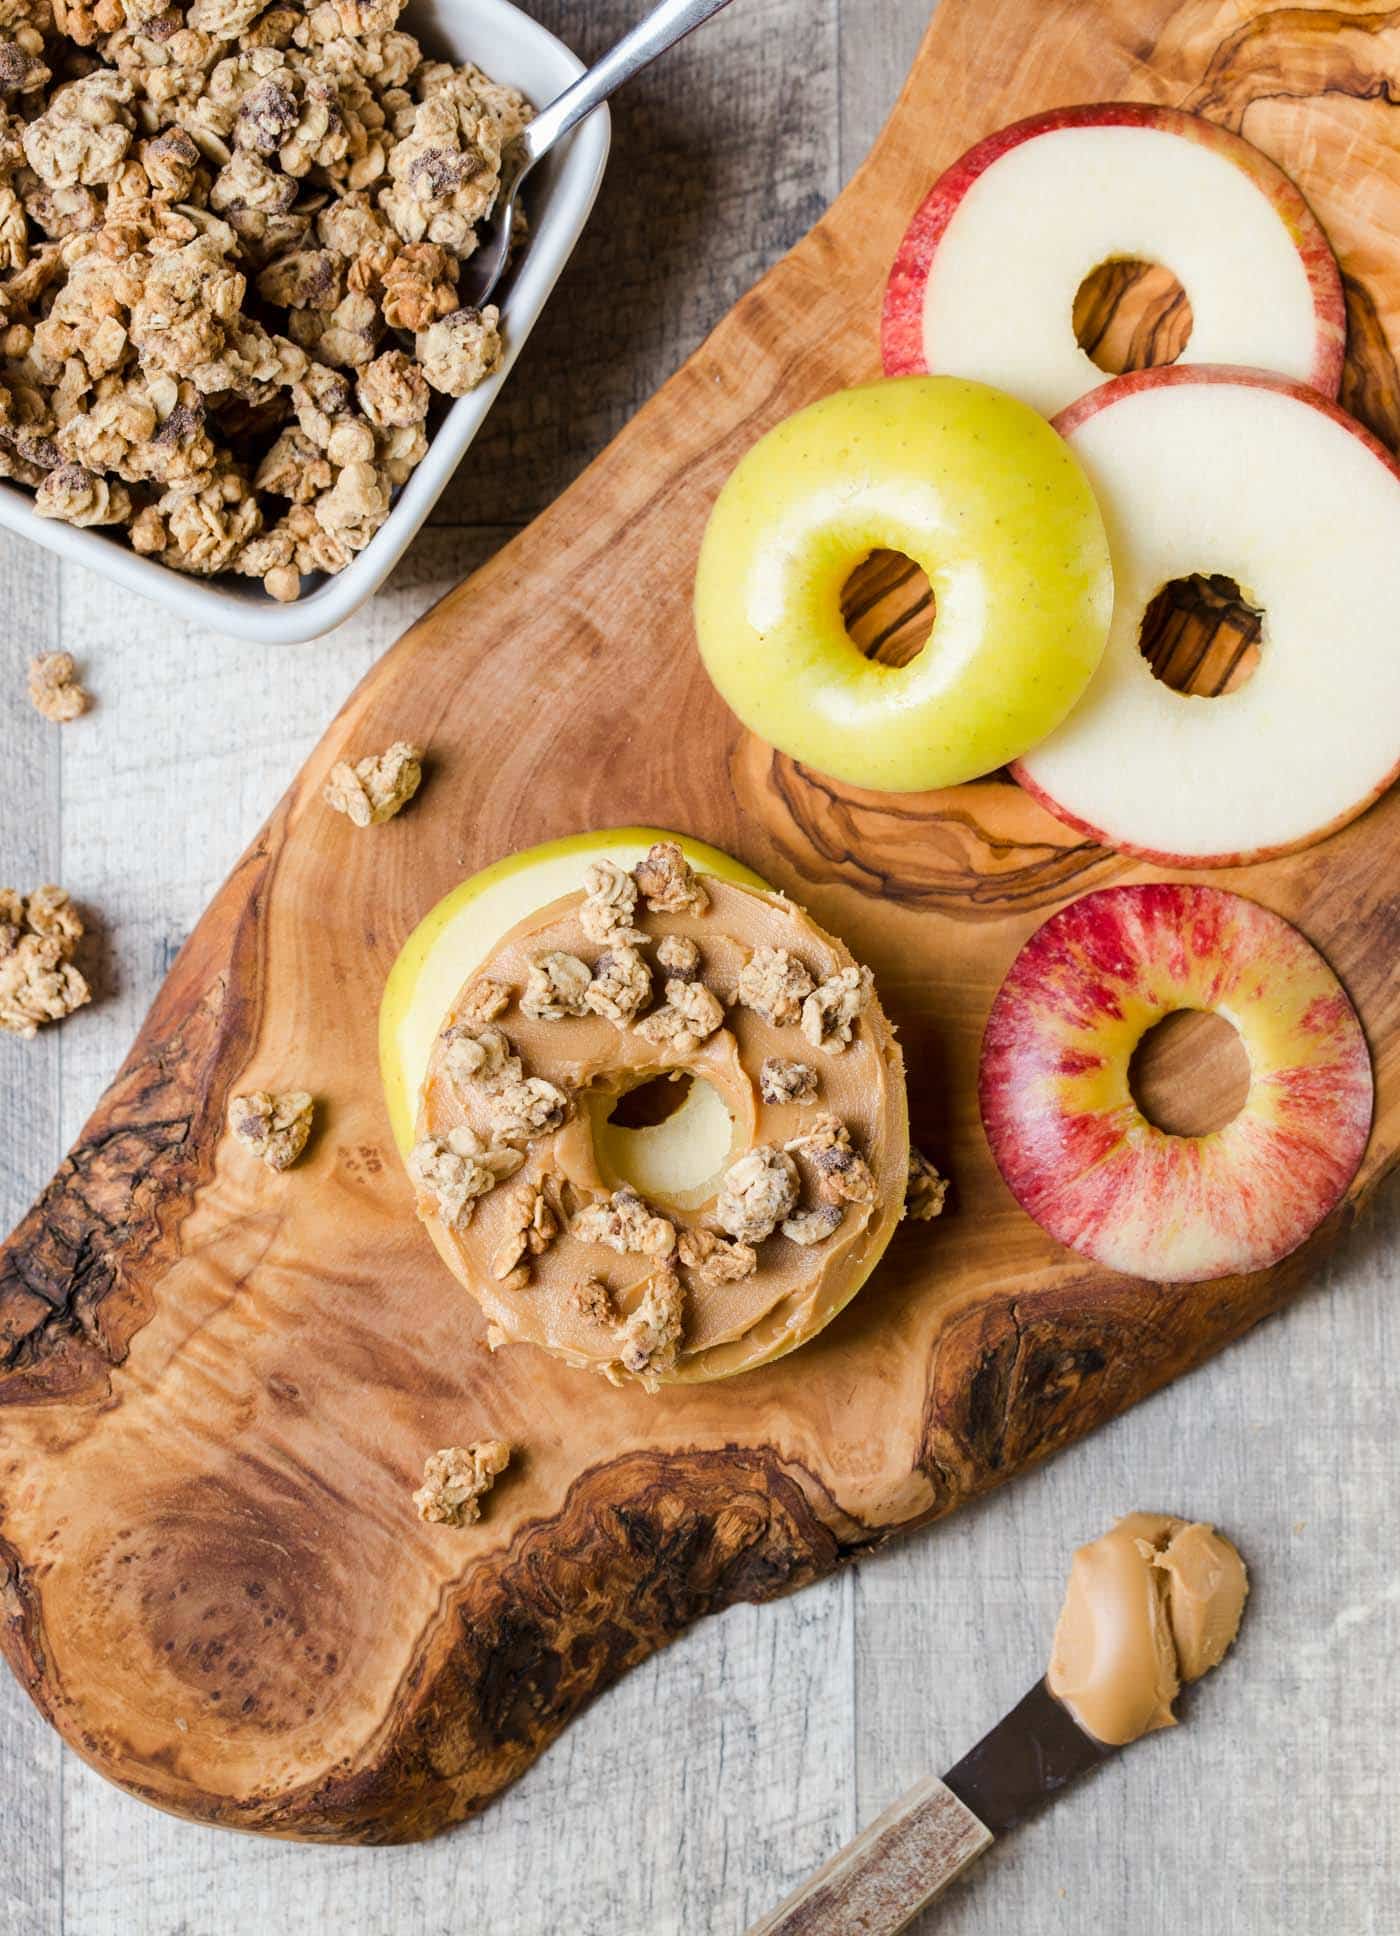 apple slices on wooden board with almond butter and granola.